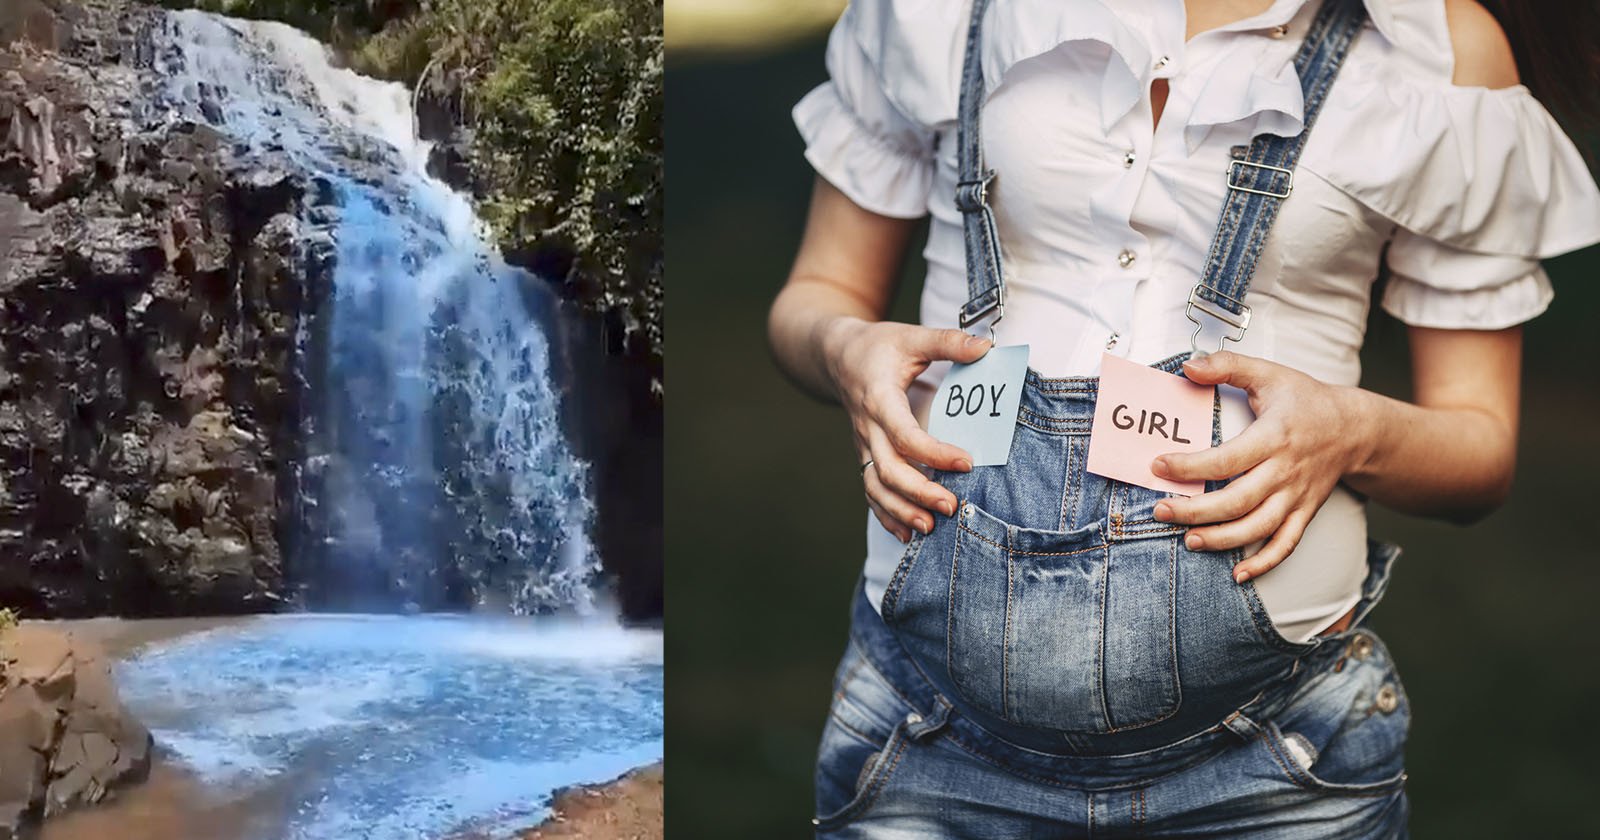 Couple Who Dyed Waterfall Blue for Gender Reveal Photos Under Investigation